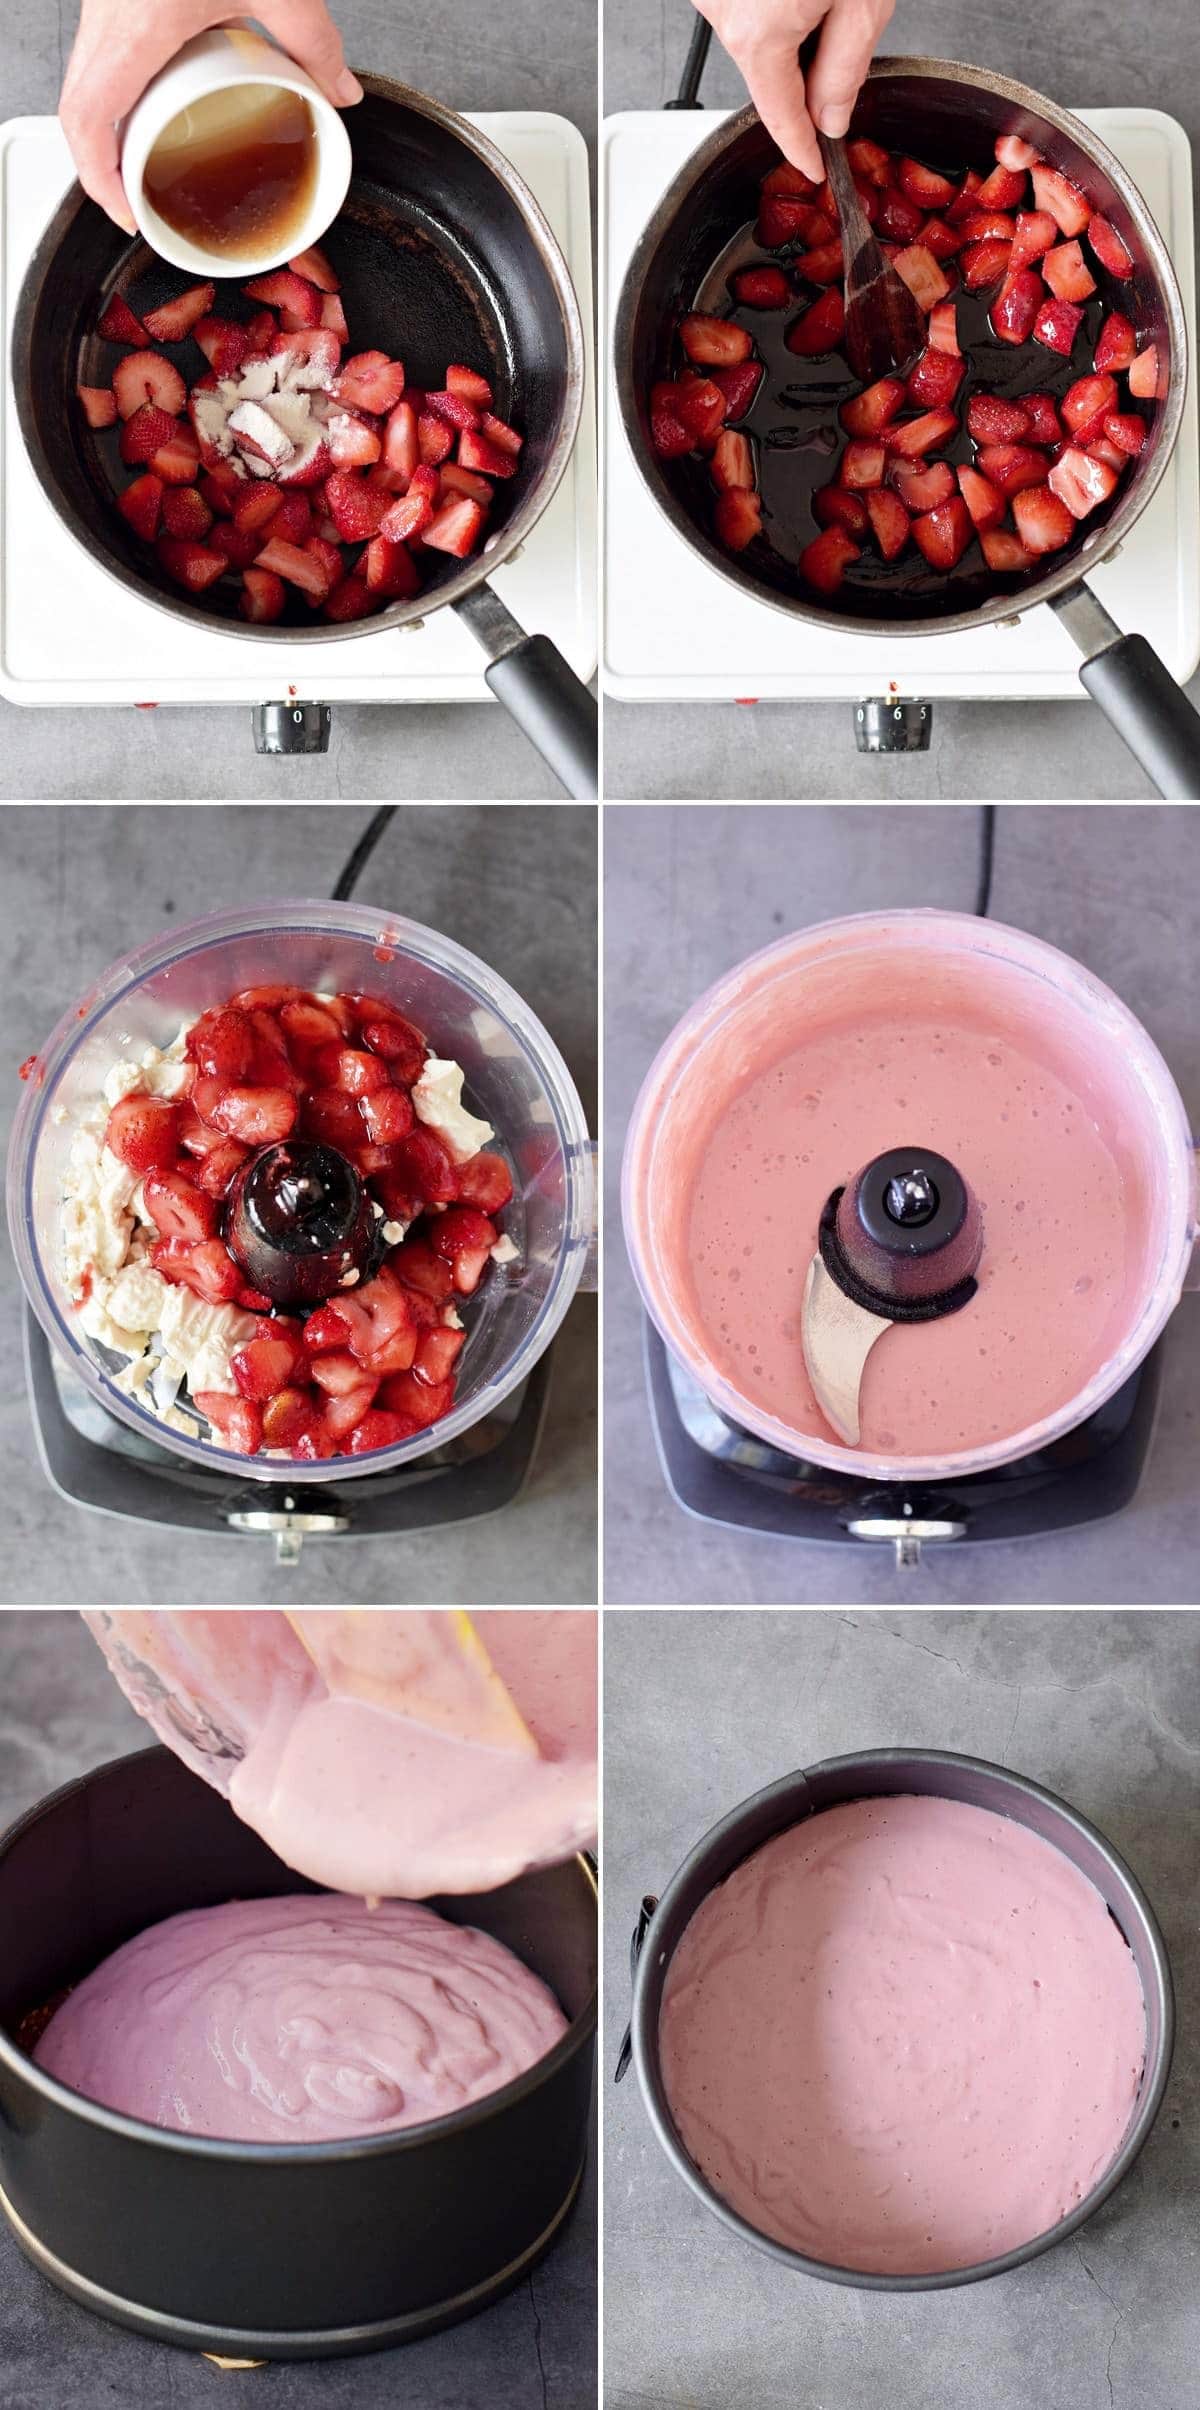 6 process shots how to make a smooth cream with strawberries